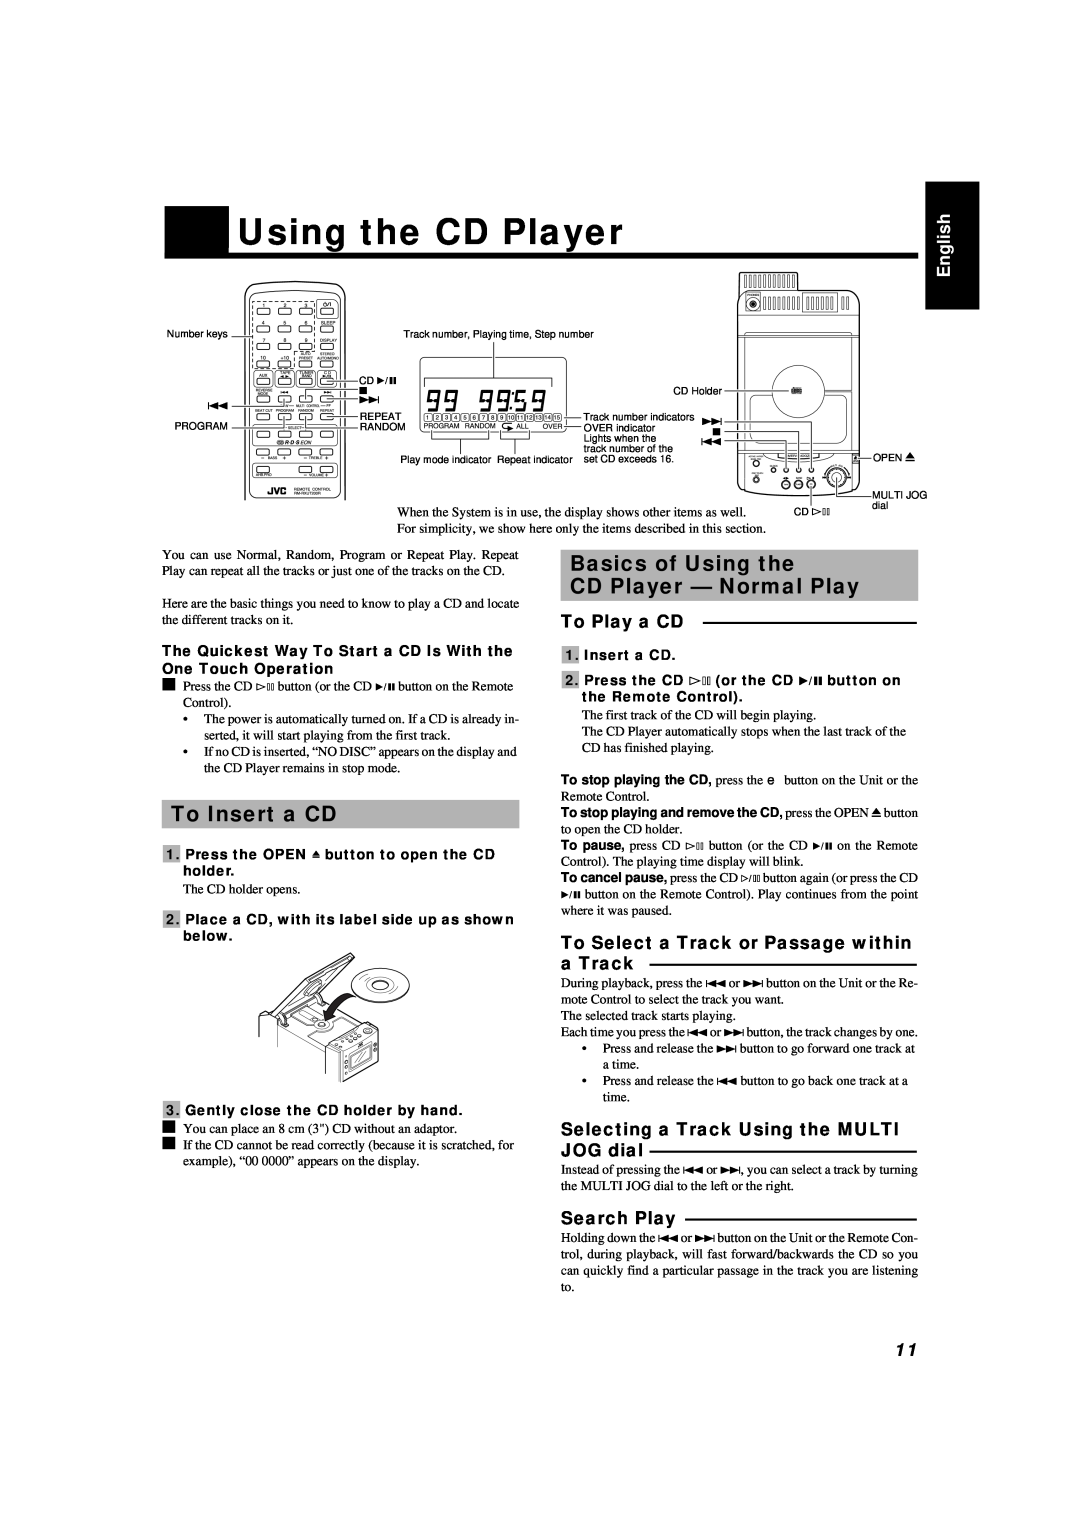 JVC UX-T300R manual To Insert a CD, Basics of Using the CD Player - Normal Play, To Play a CD, Search Play, English 